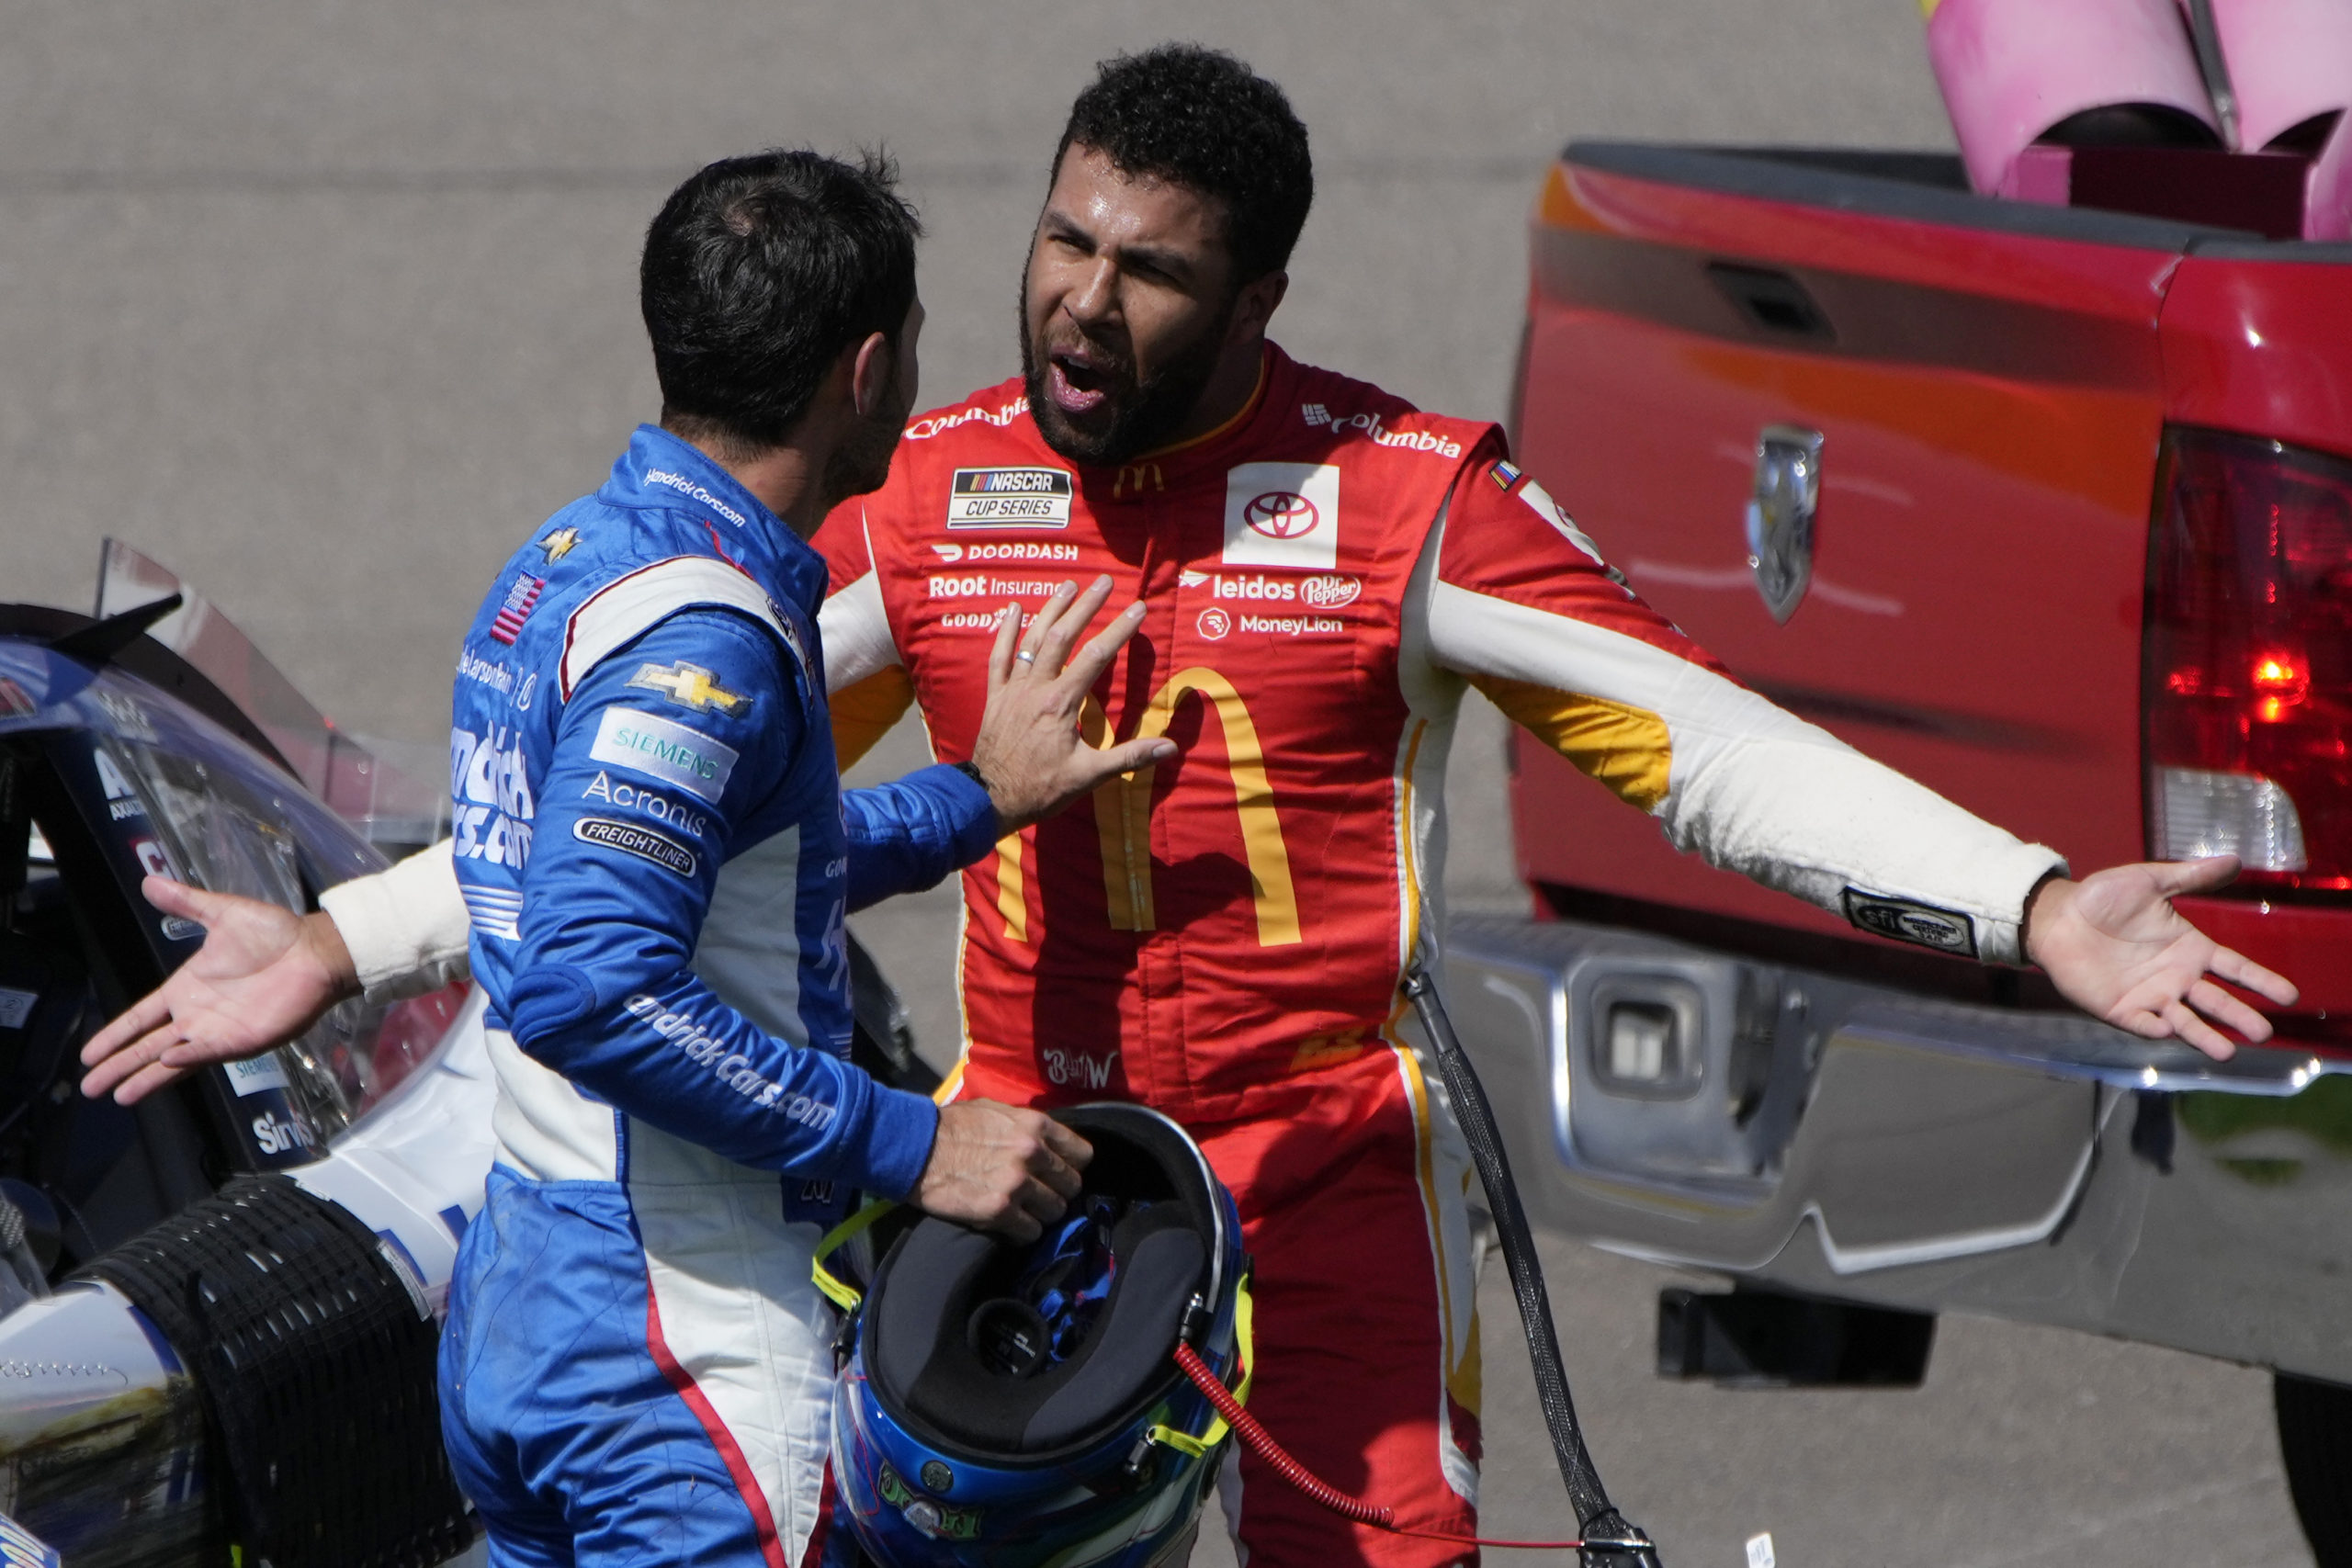 Bubba Wallace, right, argues with Kyle Larson after the two crashed during a NASCAR Cup Series auto race Oct. 16 in Las Vegas.